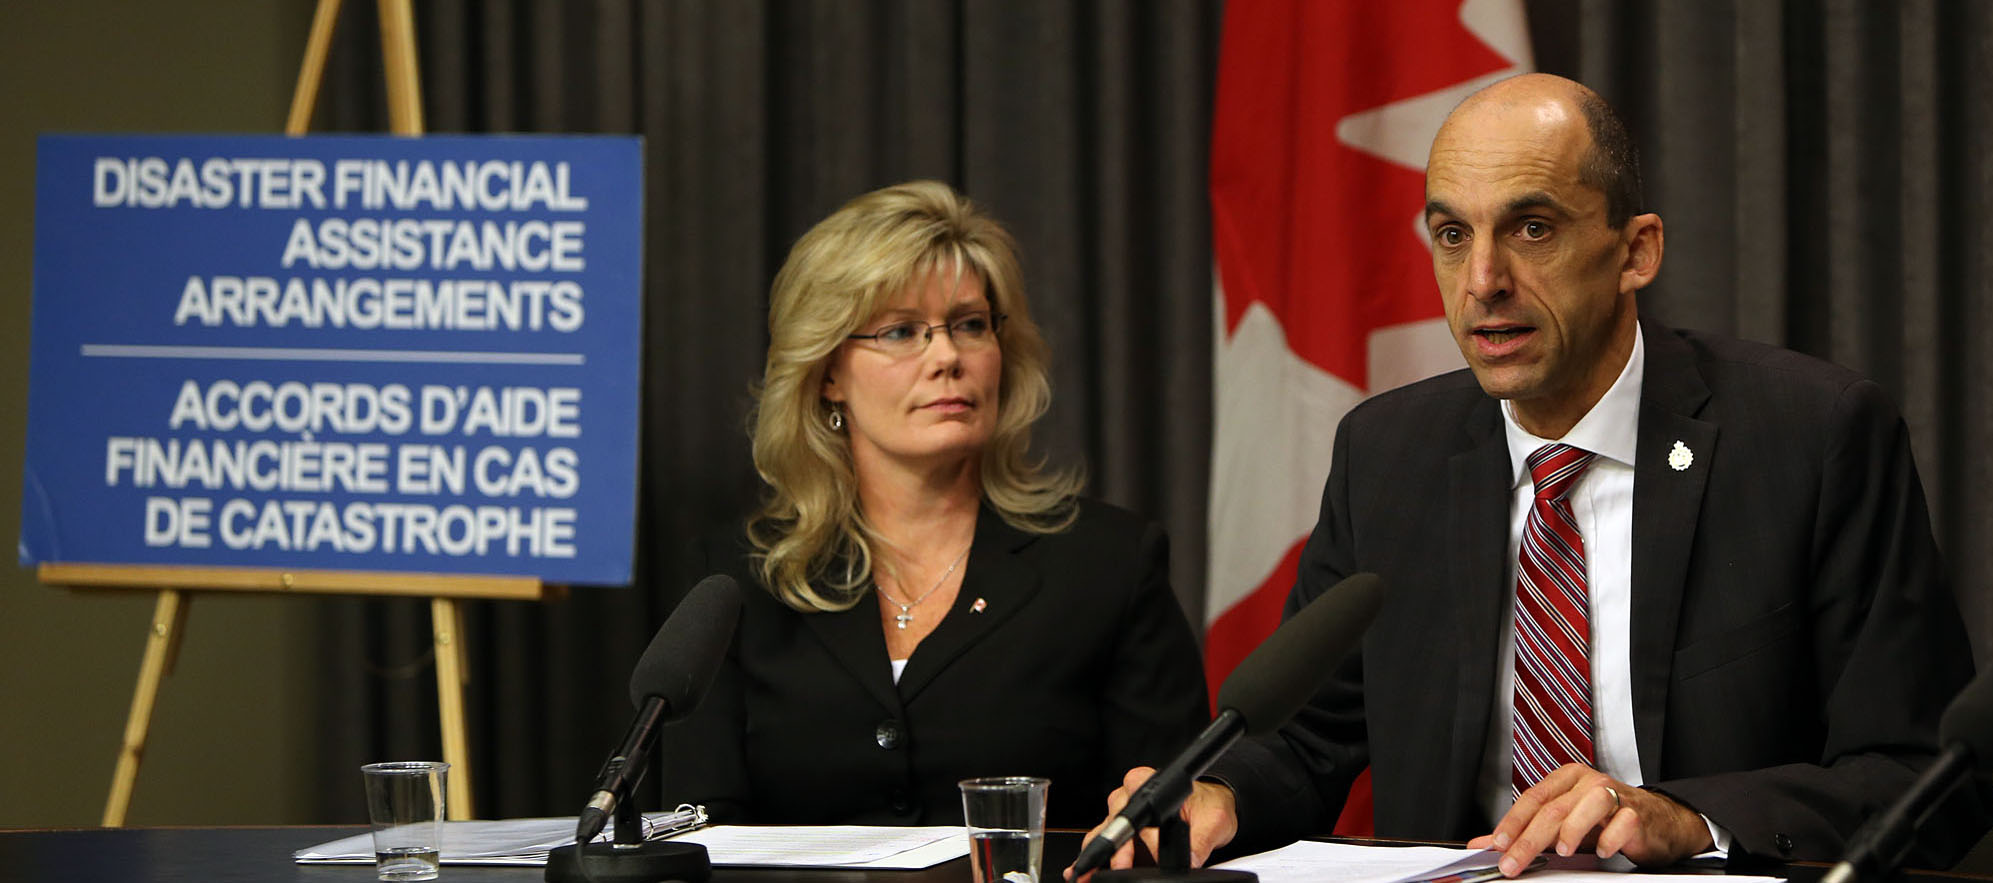 The Honourable Steven Blaney, Minister of Public Safety and Emergency Preparedness (right), and the Honourable Shelly Glover, Minister of Canadian Heritage and Official Languages and Regional Minister for Manitoba